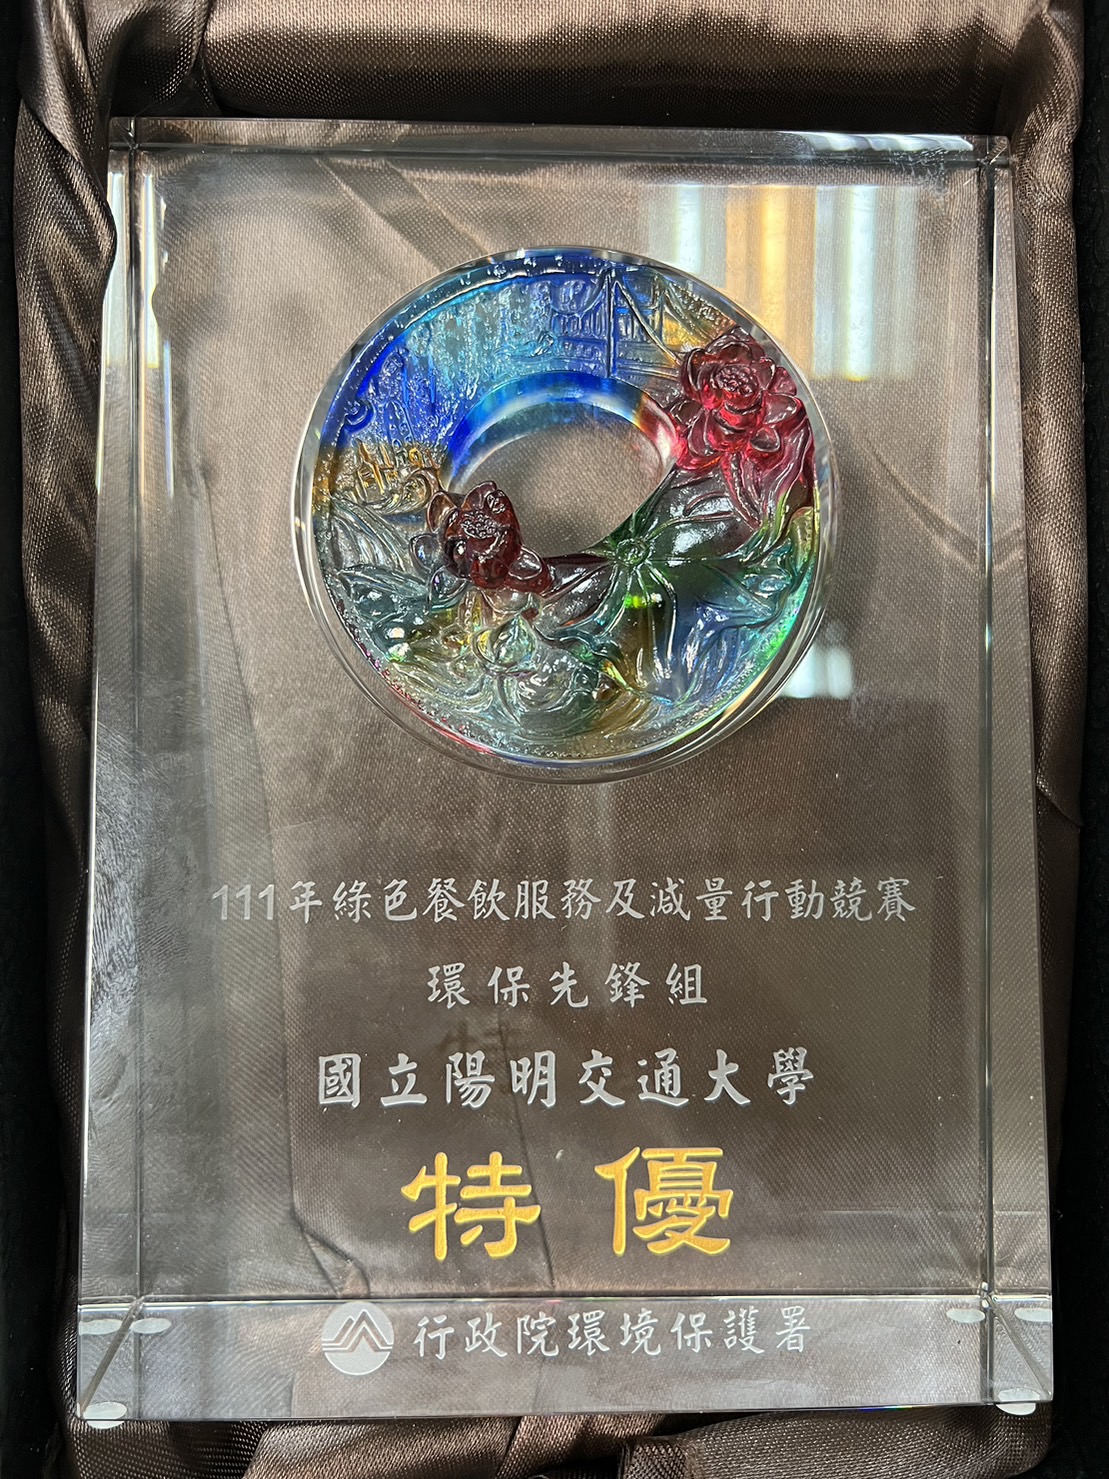 NYCU won the top 5 award in Environmental Protection Administration’s Green Catering Service and Waste Reduction Action Competition